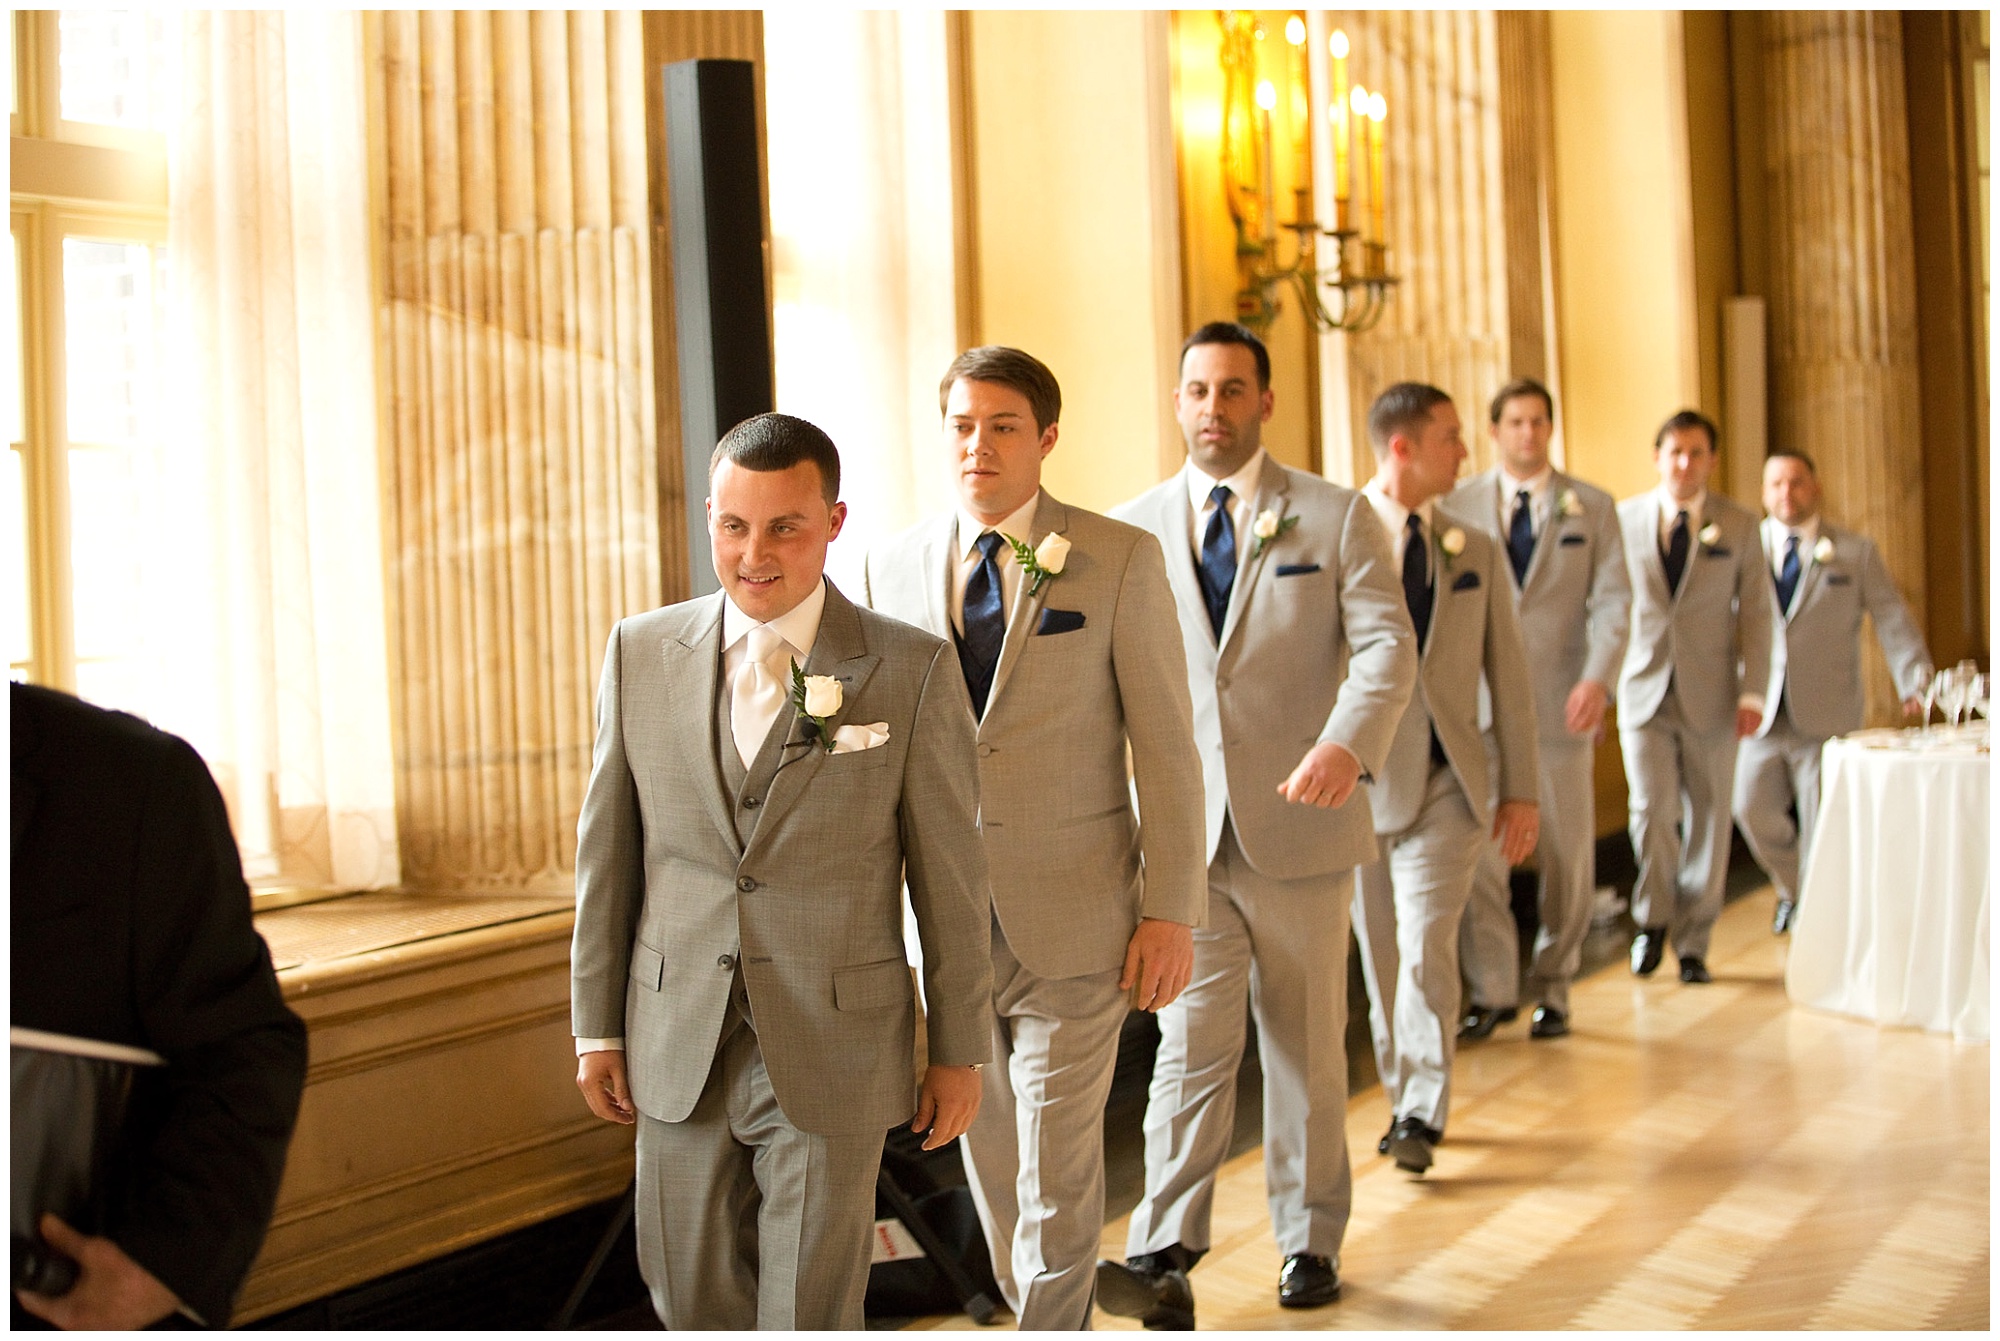 A groom and groomsmen procession to the wedding ceremony.